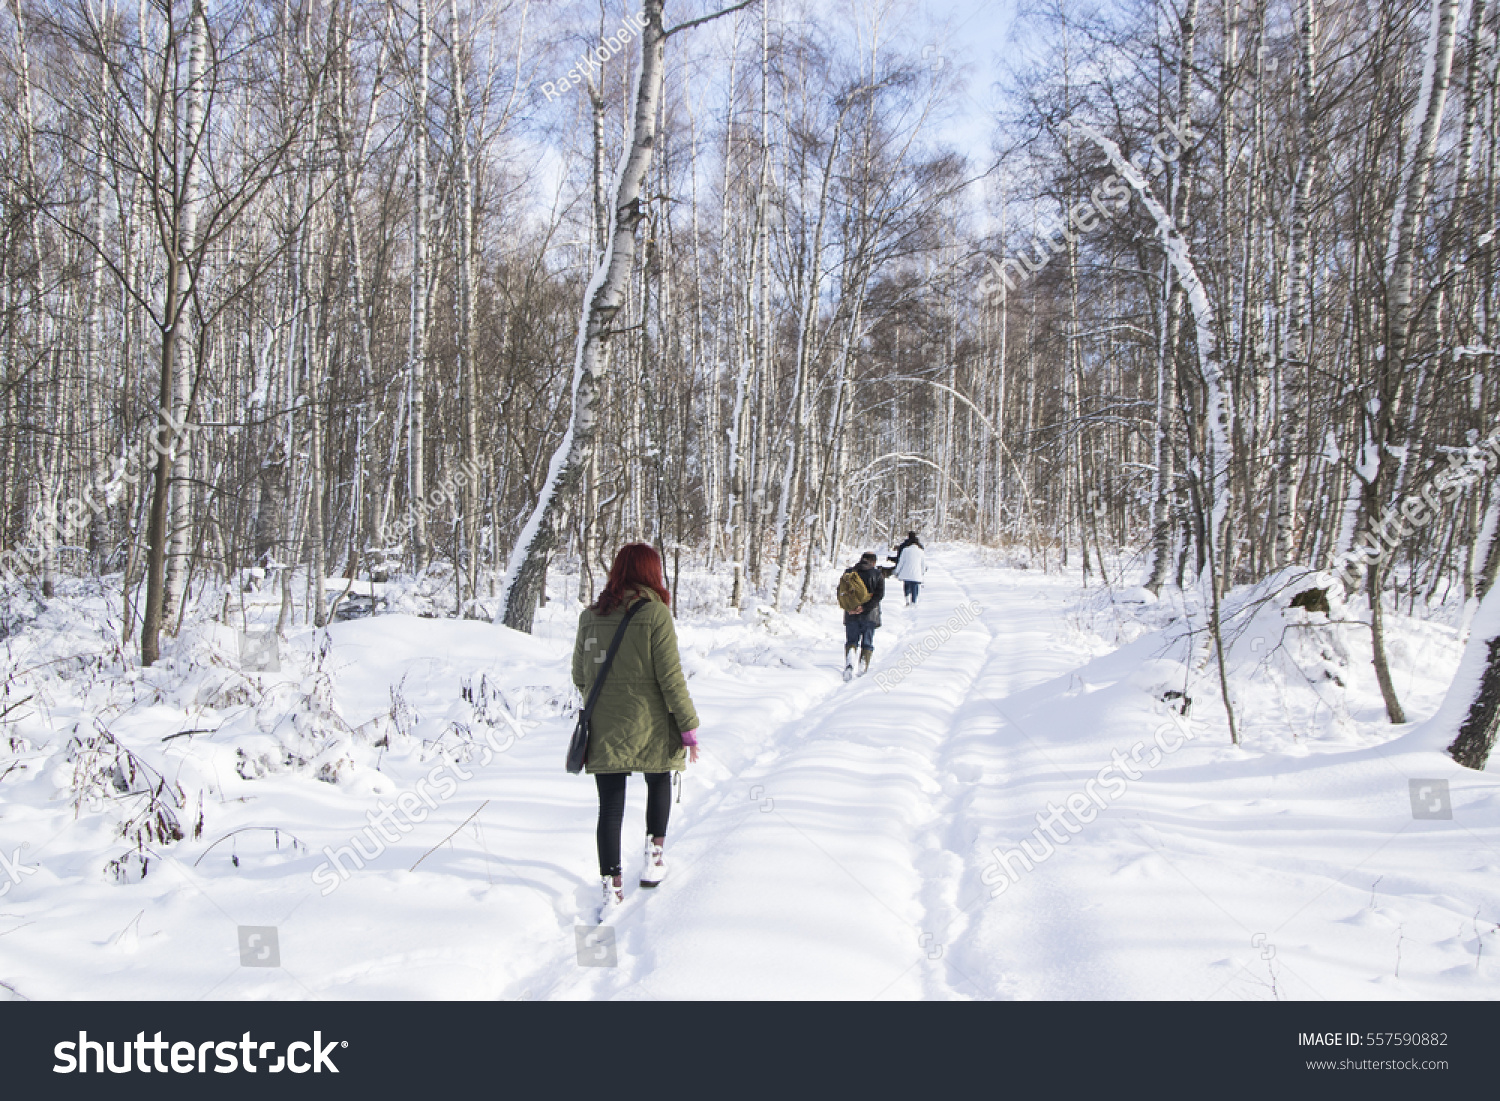 hiking in winter mountains. People traveling and sport concept. #557590882